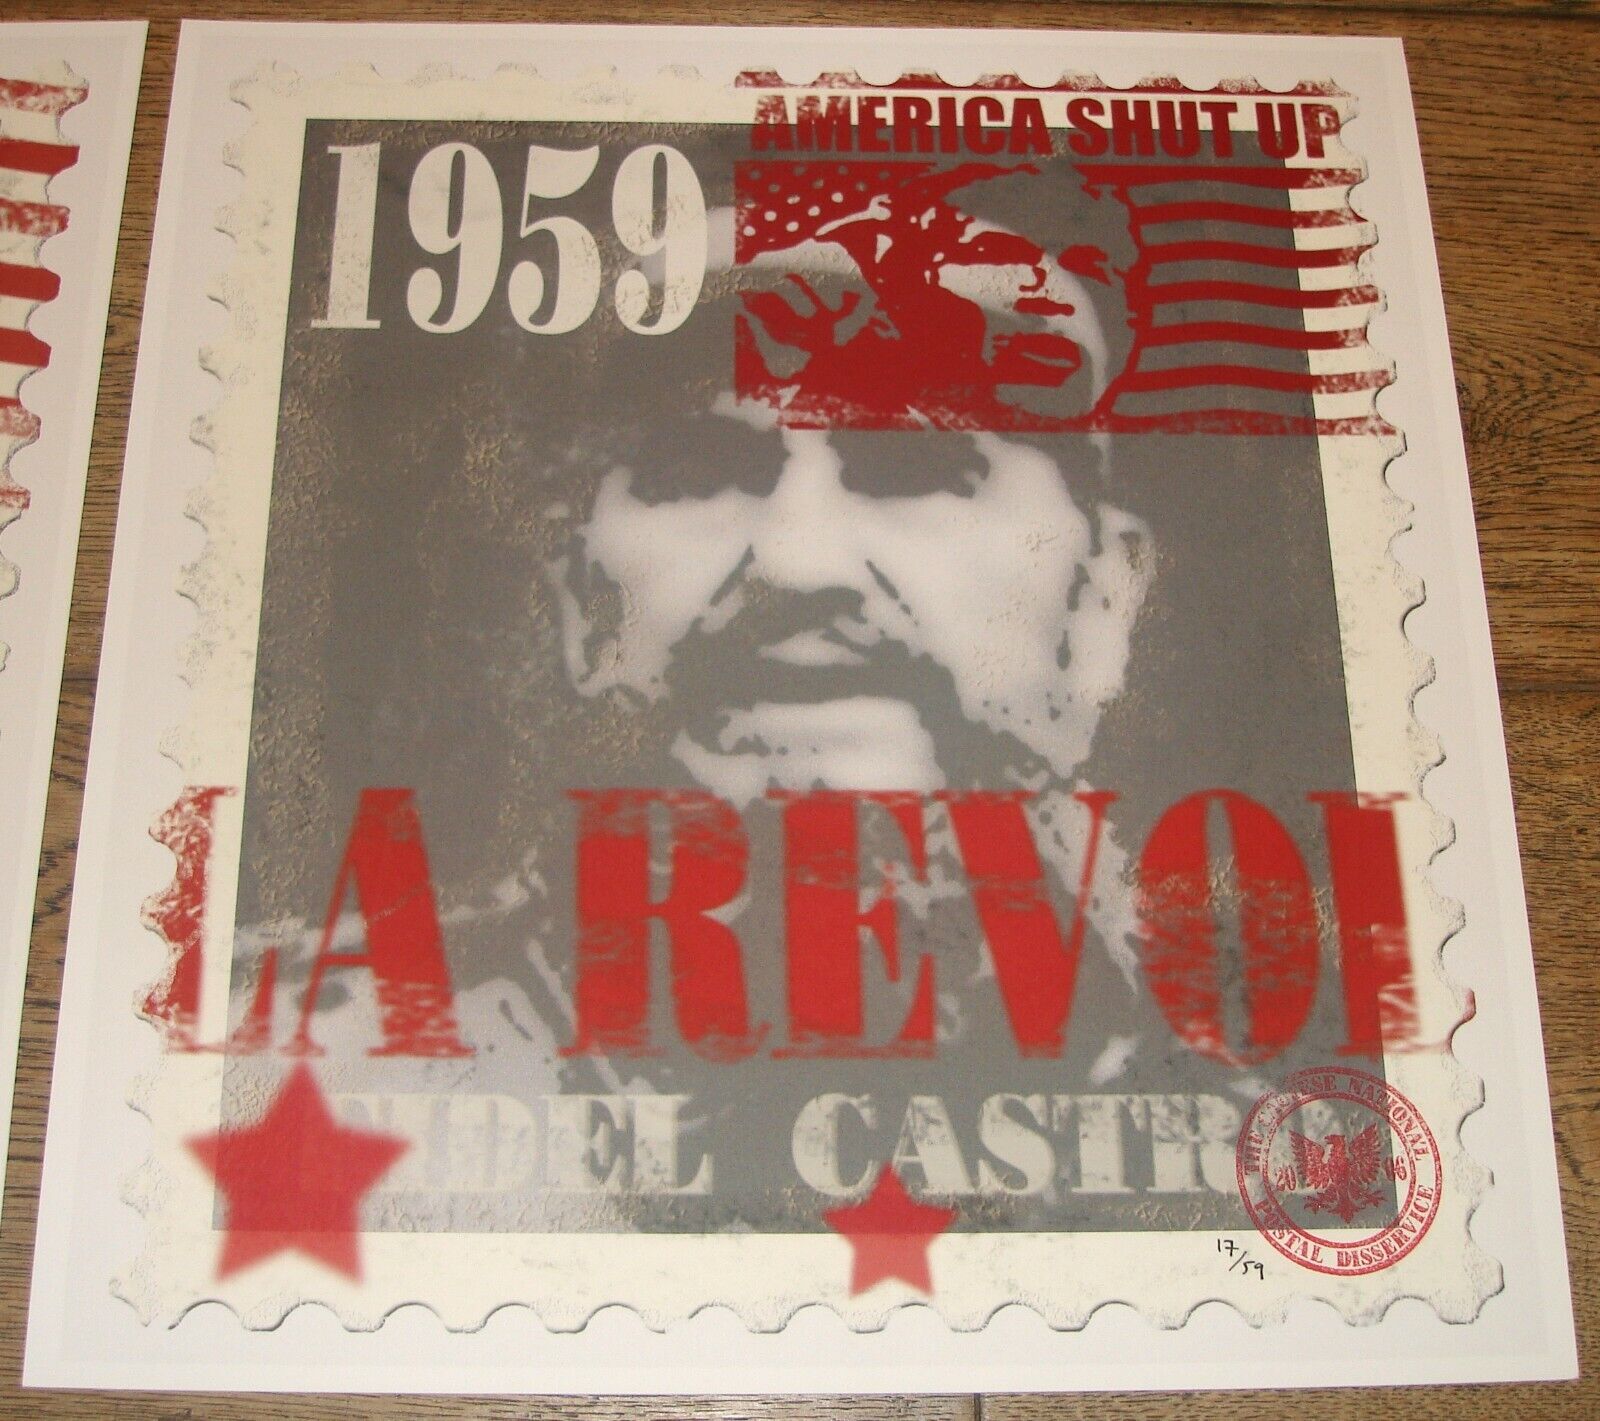 James Cauty (1956 - ) CNPD Fidel Castro 47th, 80th and 1959 - 3 Pop Editions (2007) L-13 - Image 3 of 13